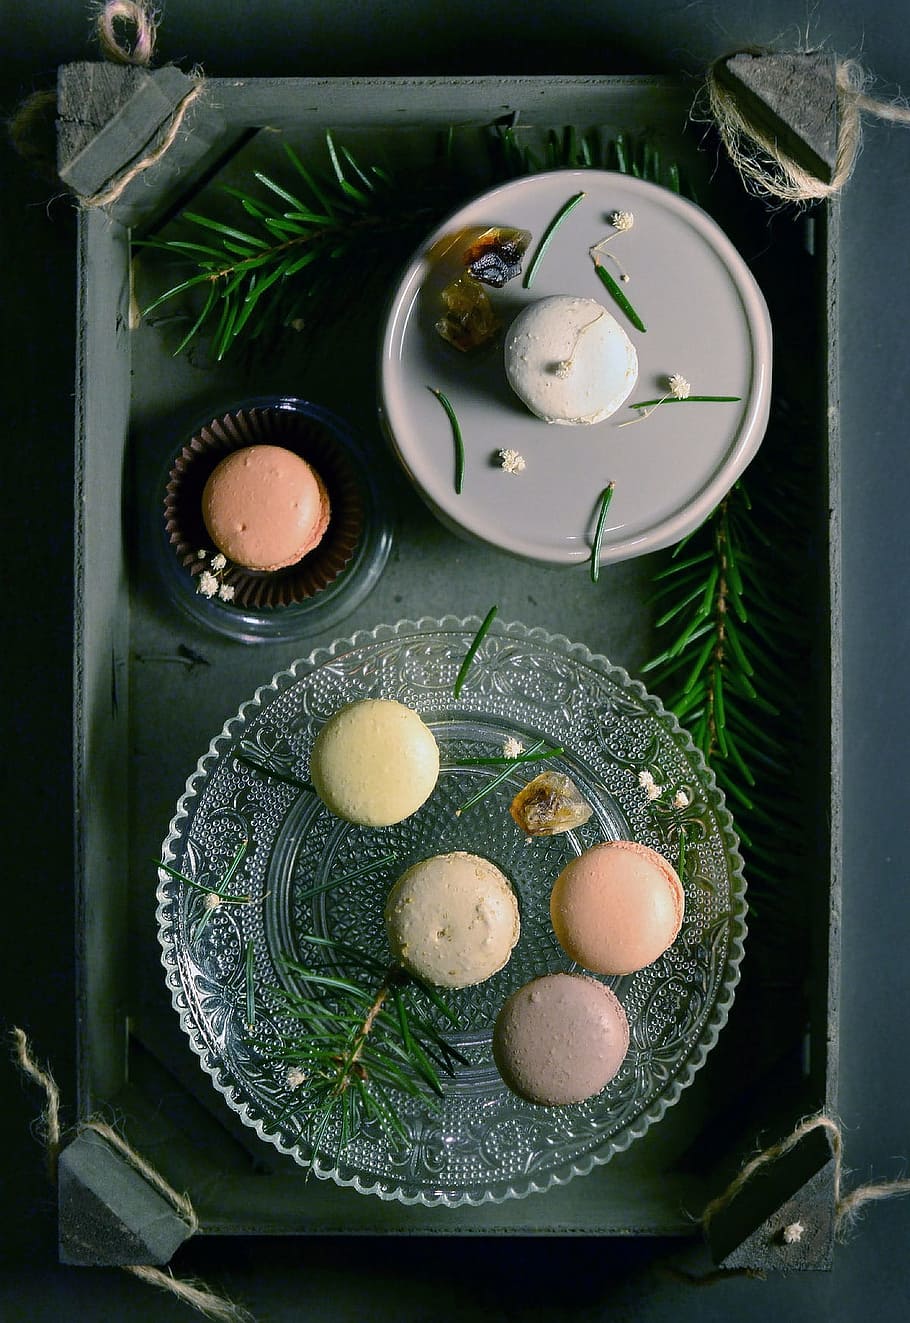 macaroons, dessert, sweets, treats, food, snack, plates, serving tray, food and drink, egg